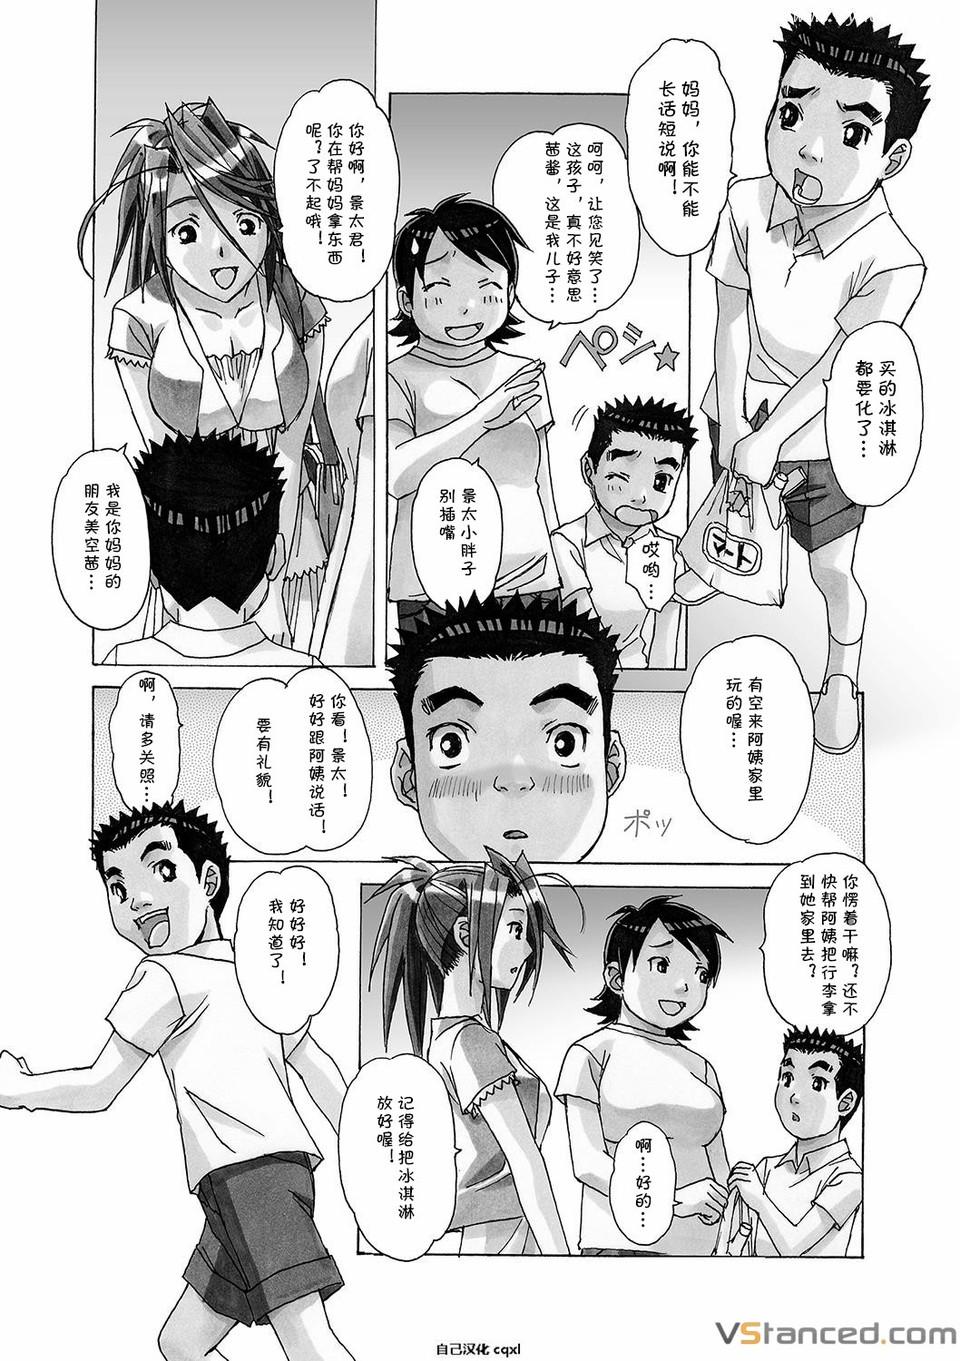 Spooning AKANE vol.03 - Original First Time - Page 4